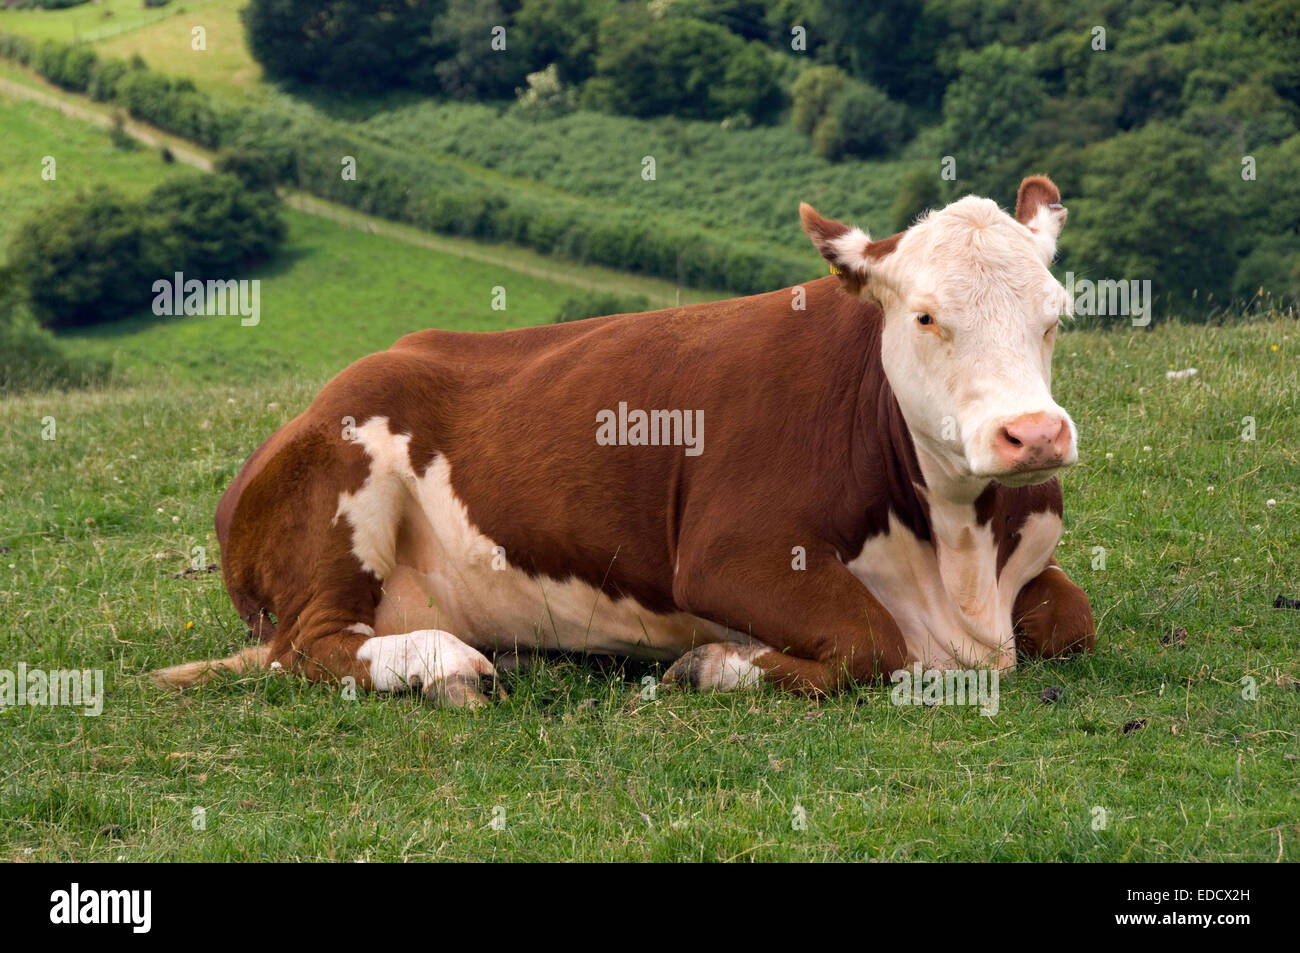 Vache Hereford. Banque D'Images